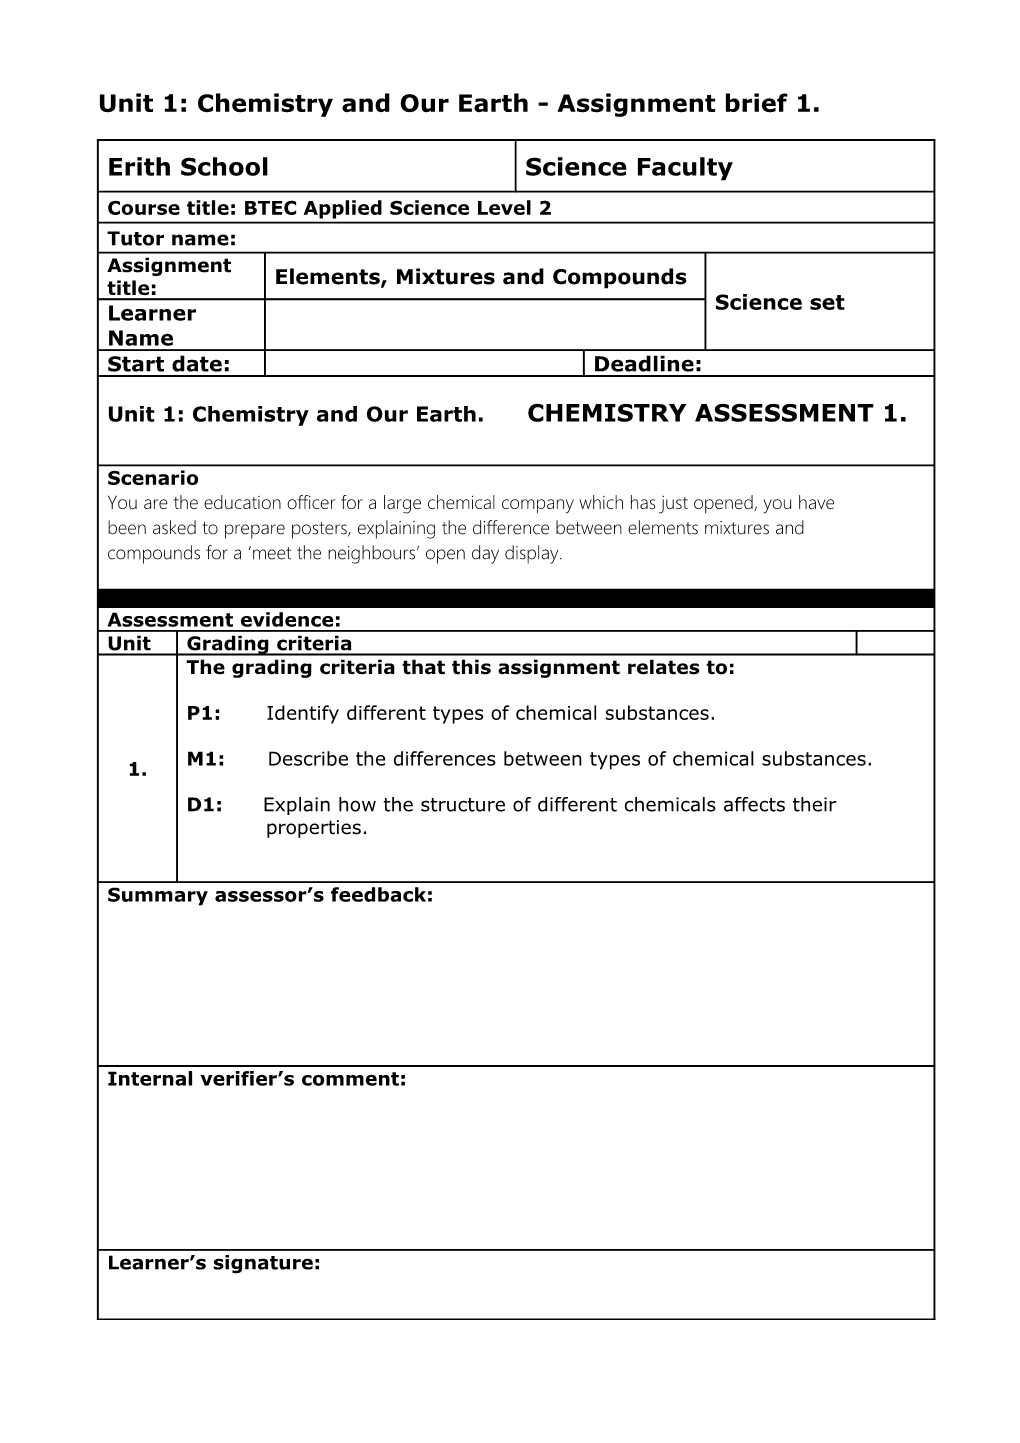 Unit 5: Biological Systems - Assignment Brief 1